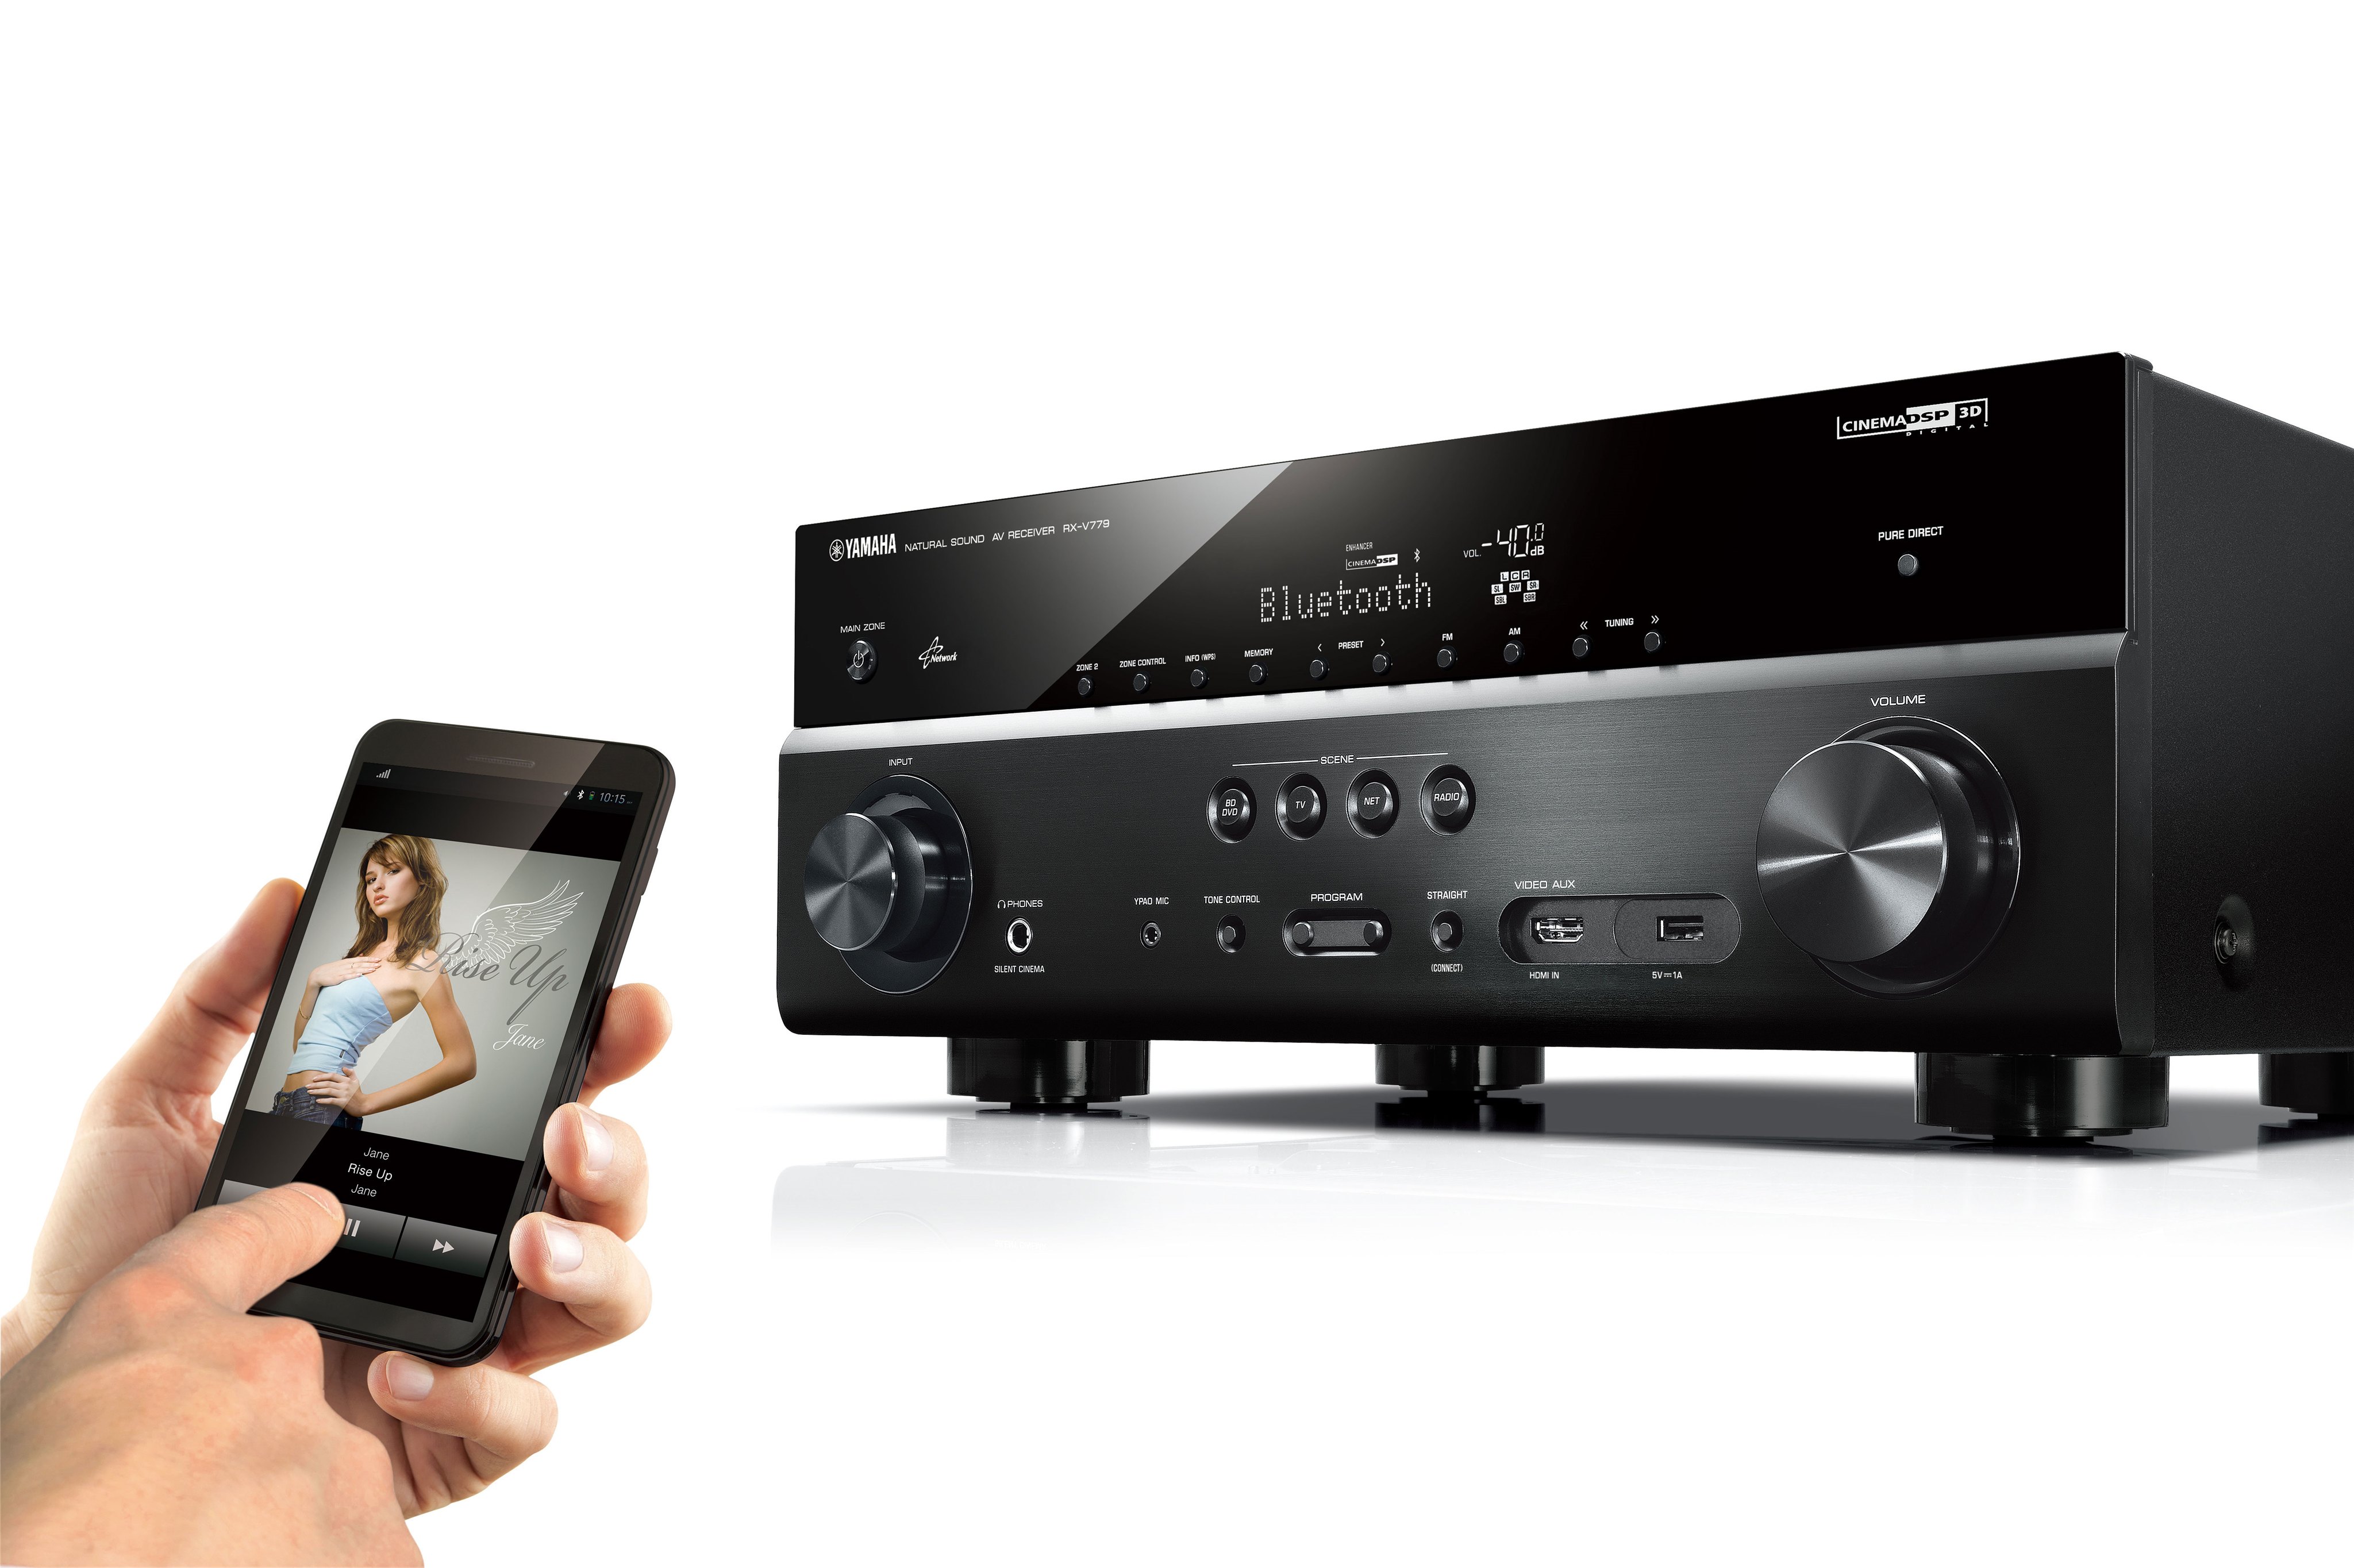 MusicCast RX-V779 - Overview - AV Receivers - Audio & Visual - Products